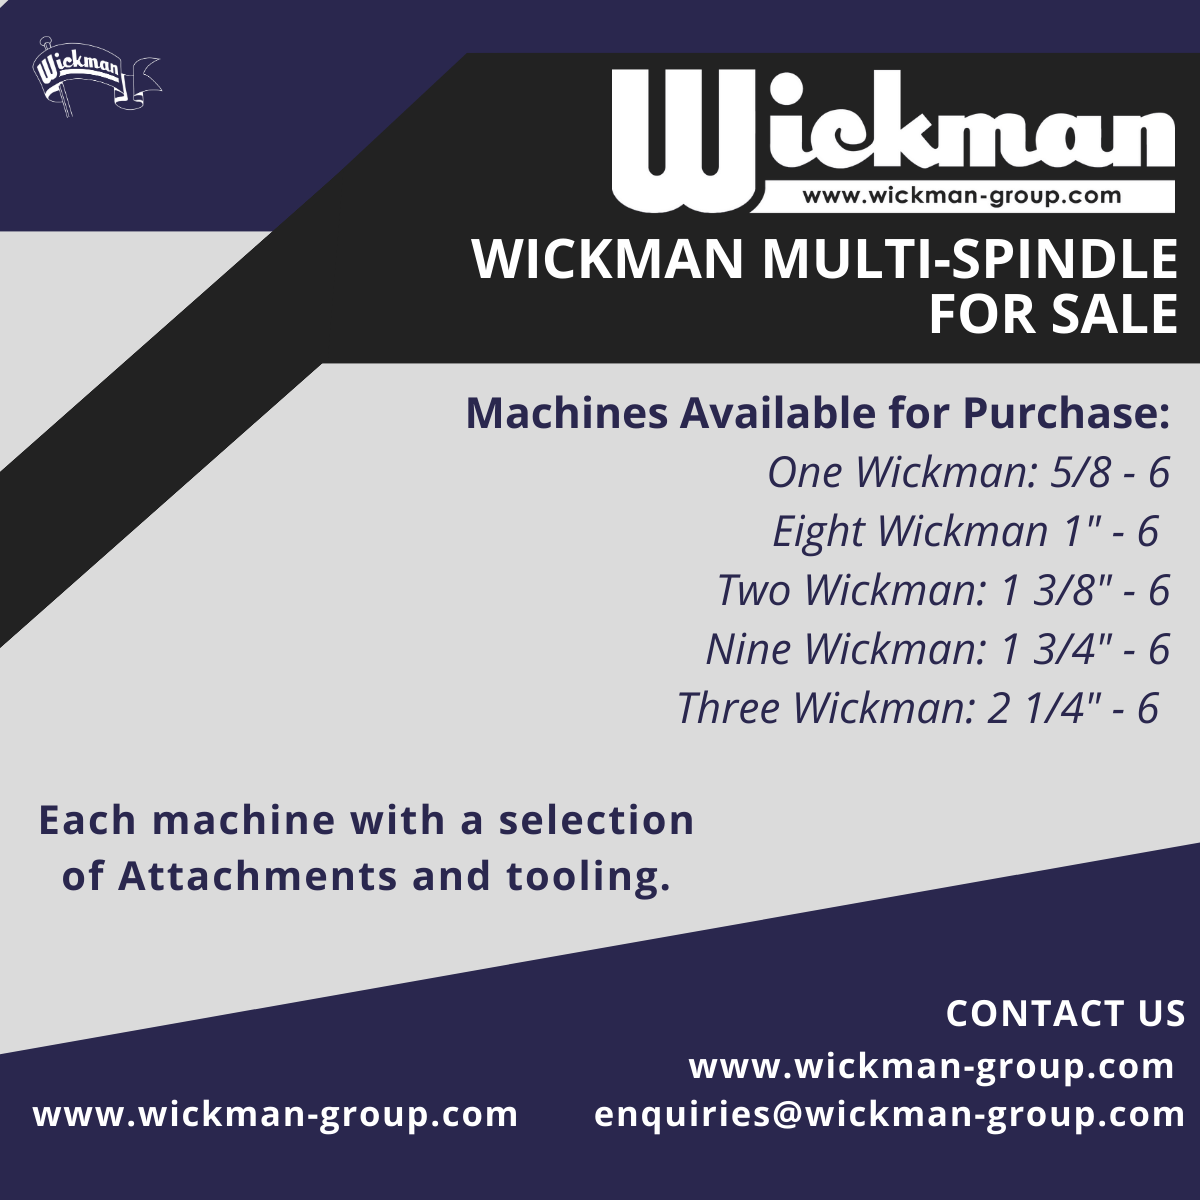 23 Wickman Multispindle Lathes For Sale by UK subcontractor restructuring 